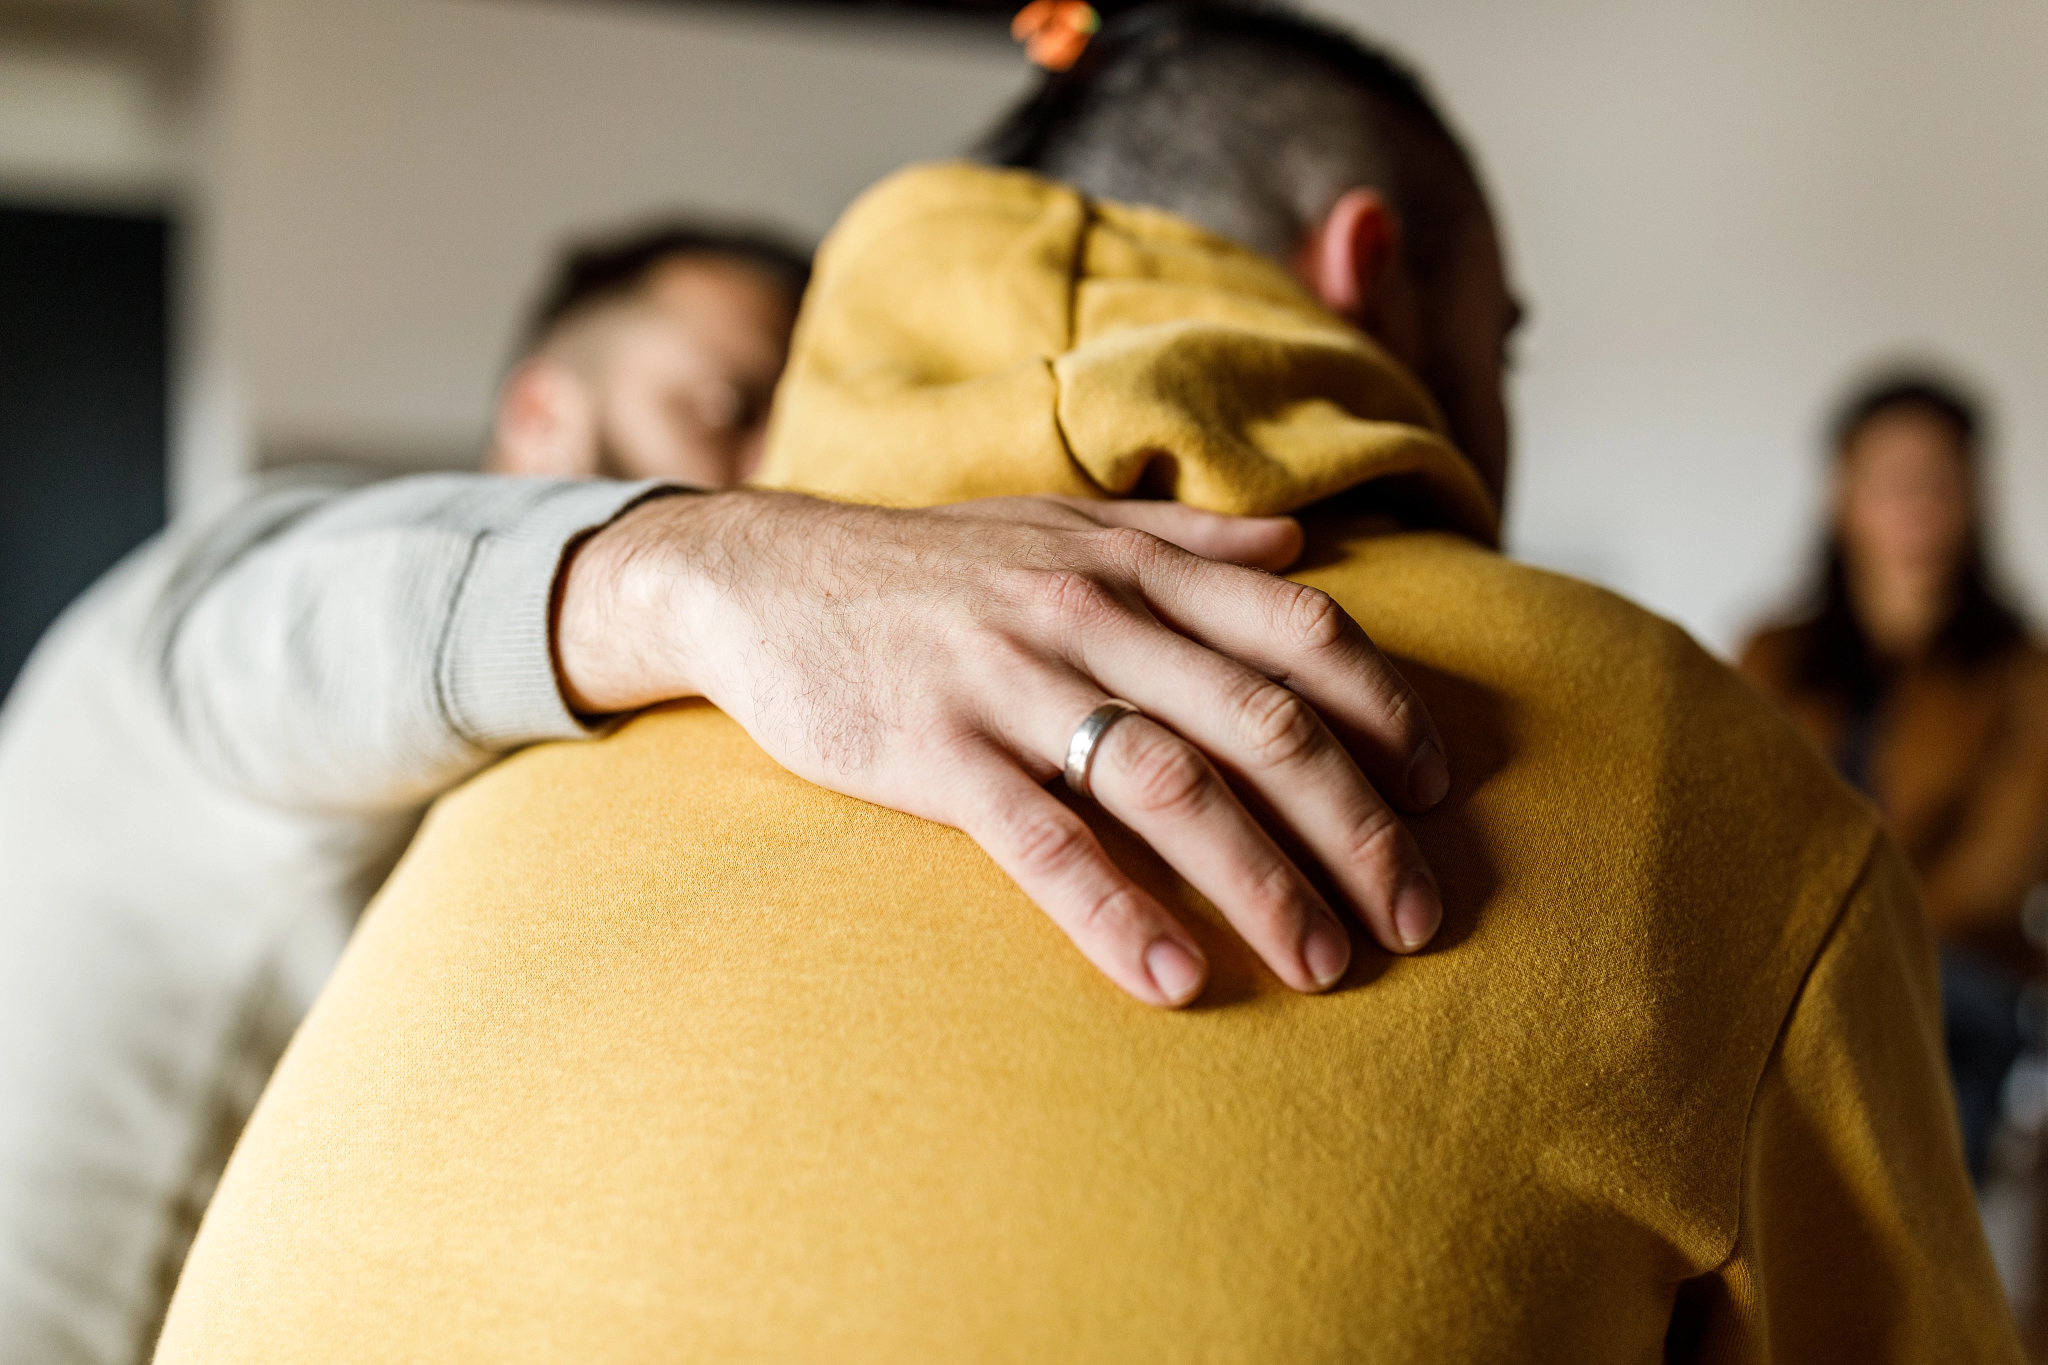 Man embracing his friend who is sharing his story at the group therapy session